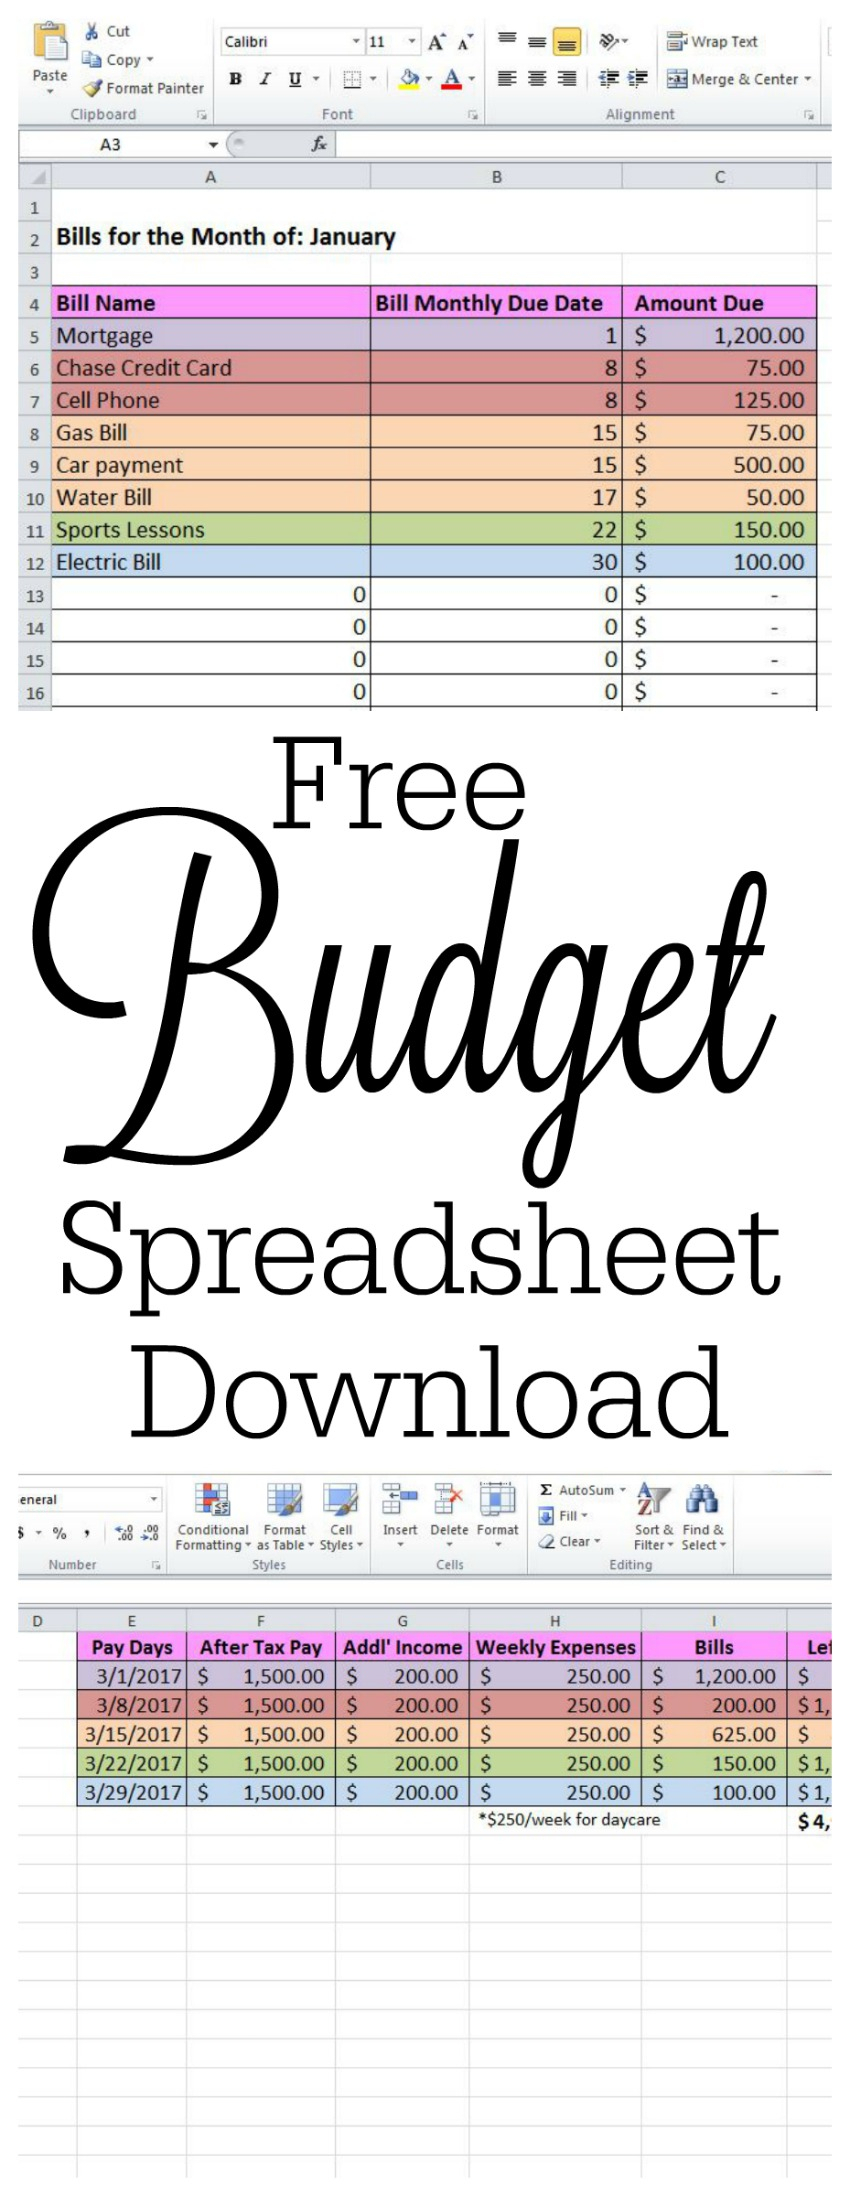 Free Budget Spreadsheet In Free Budget Spreadsheet And How To Keep Track Of Passwords  The